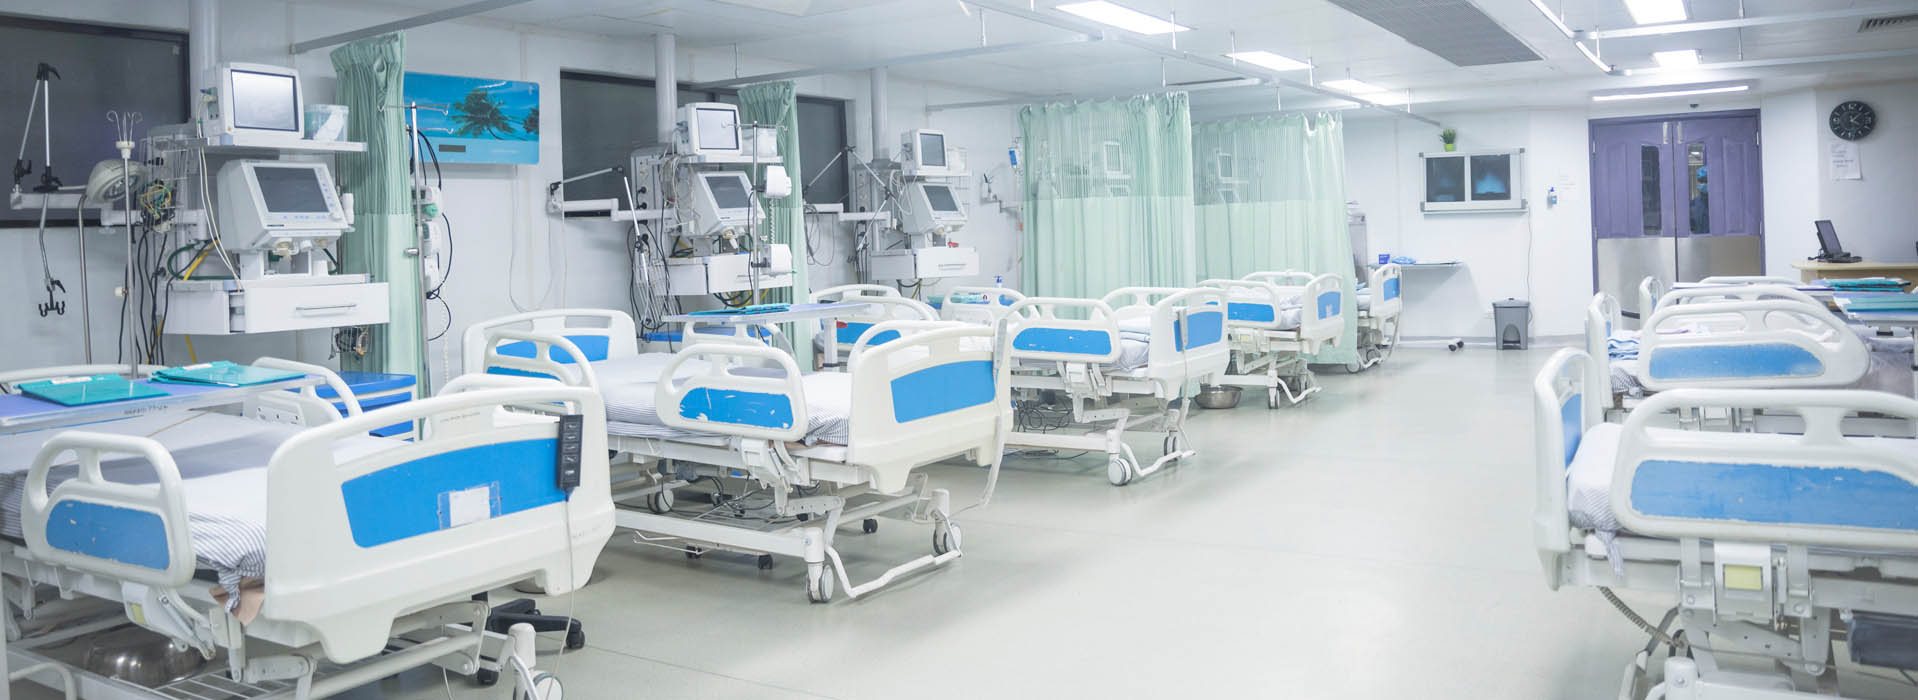 Providing the frontline hospital with smart-beds